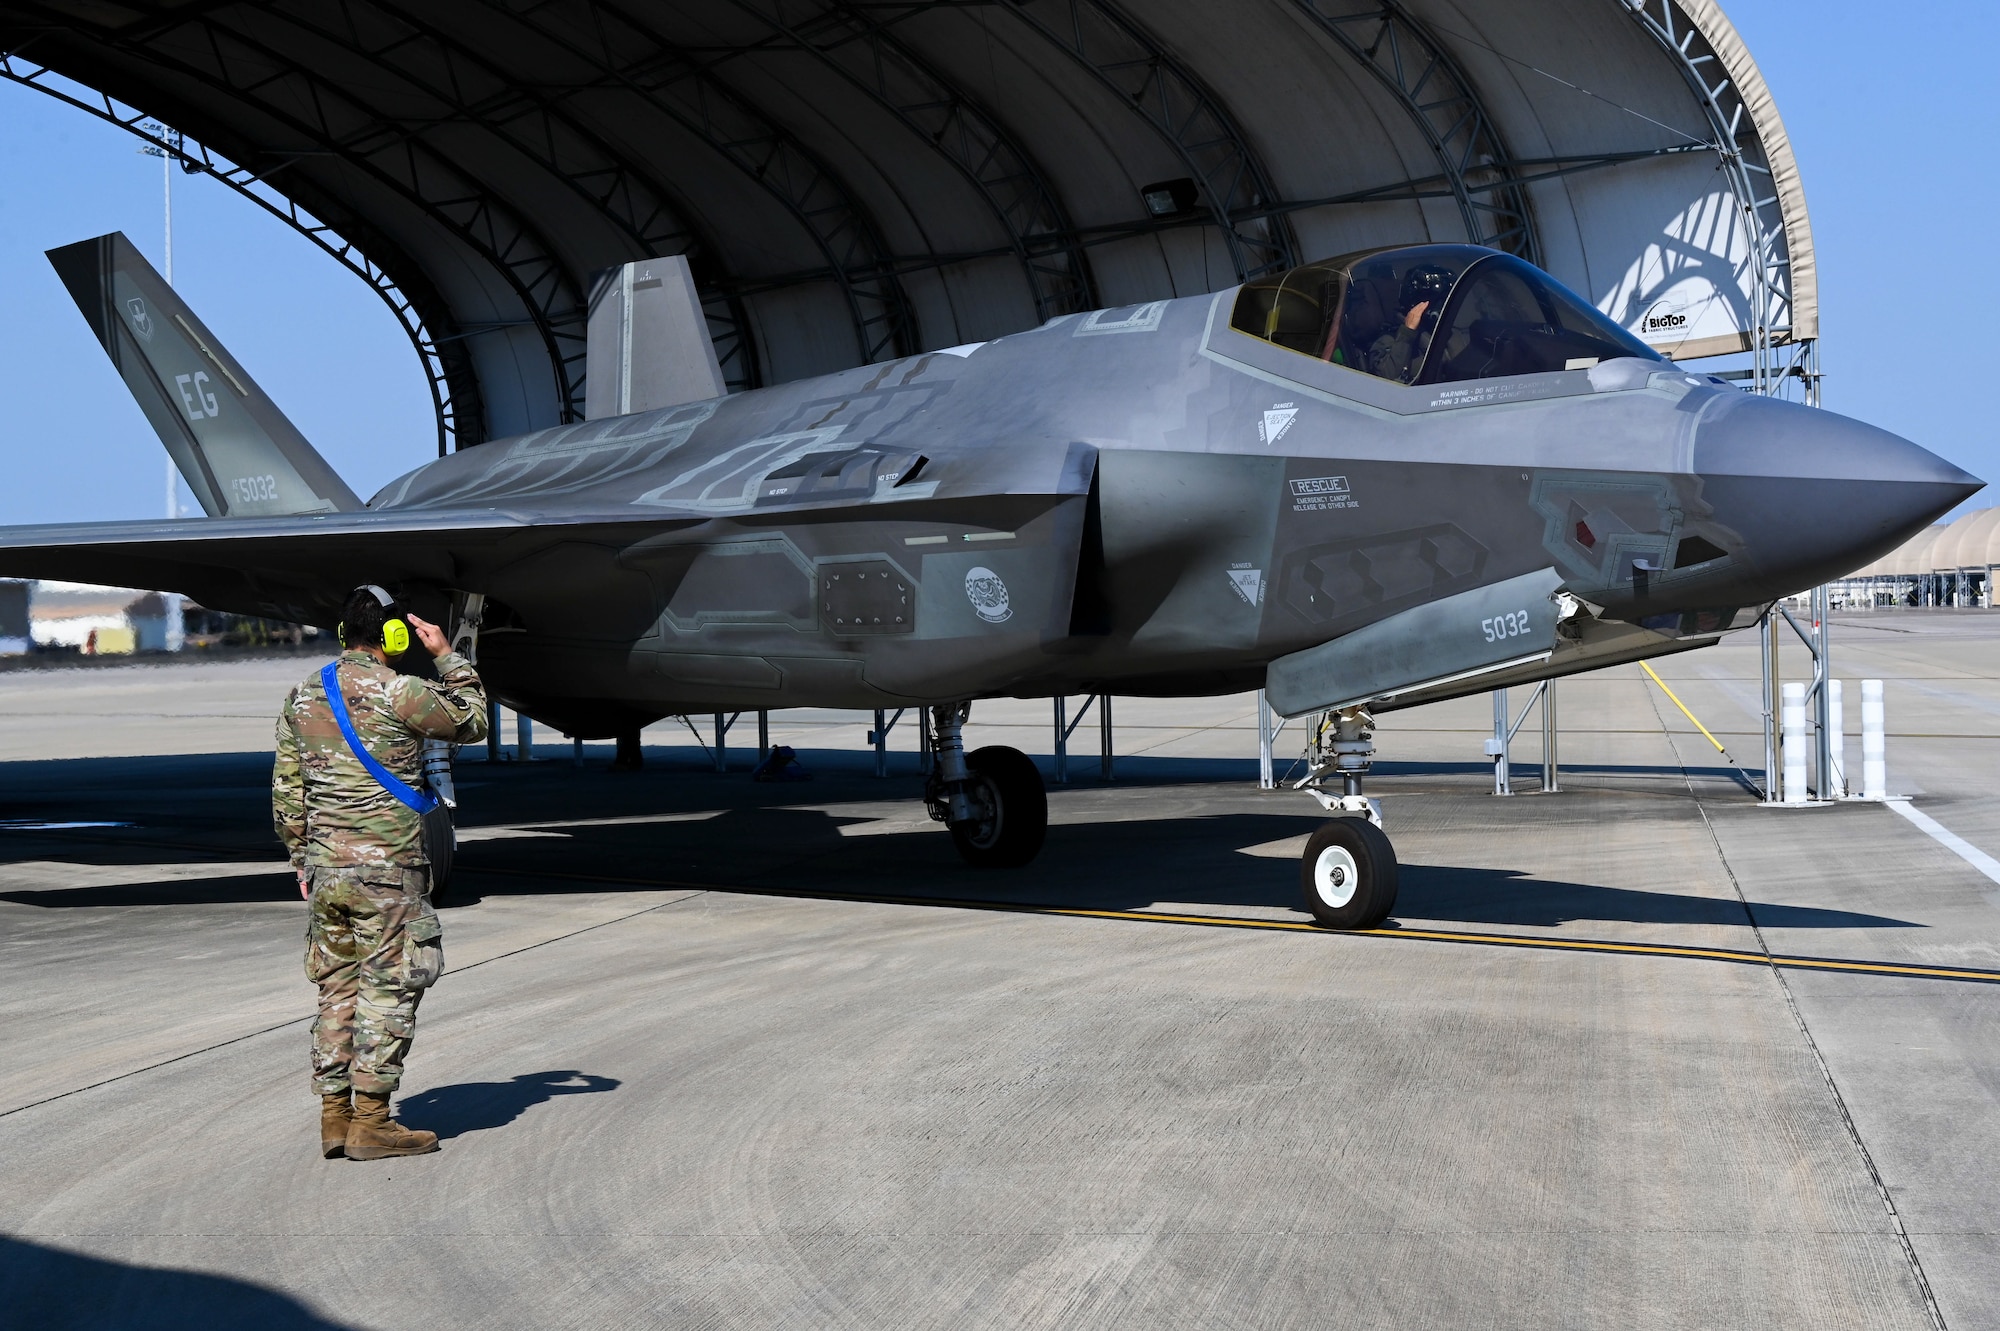 Rawls evaluated the F-35A’s ability to meet operational requirements.